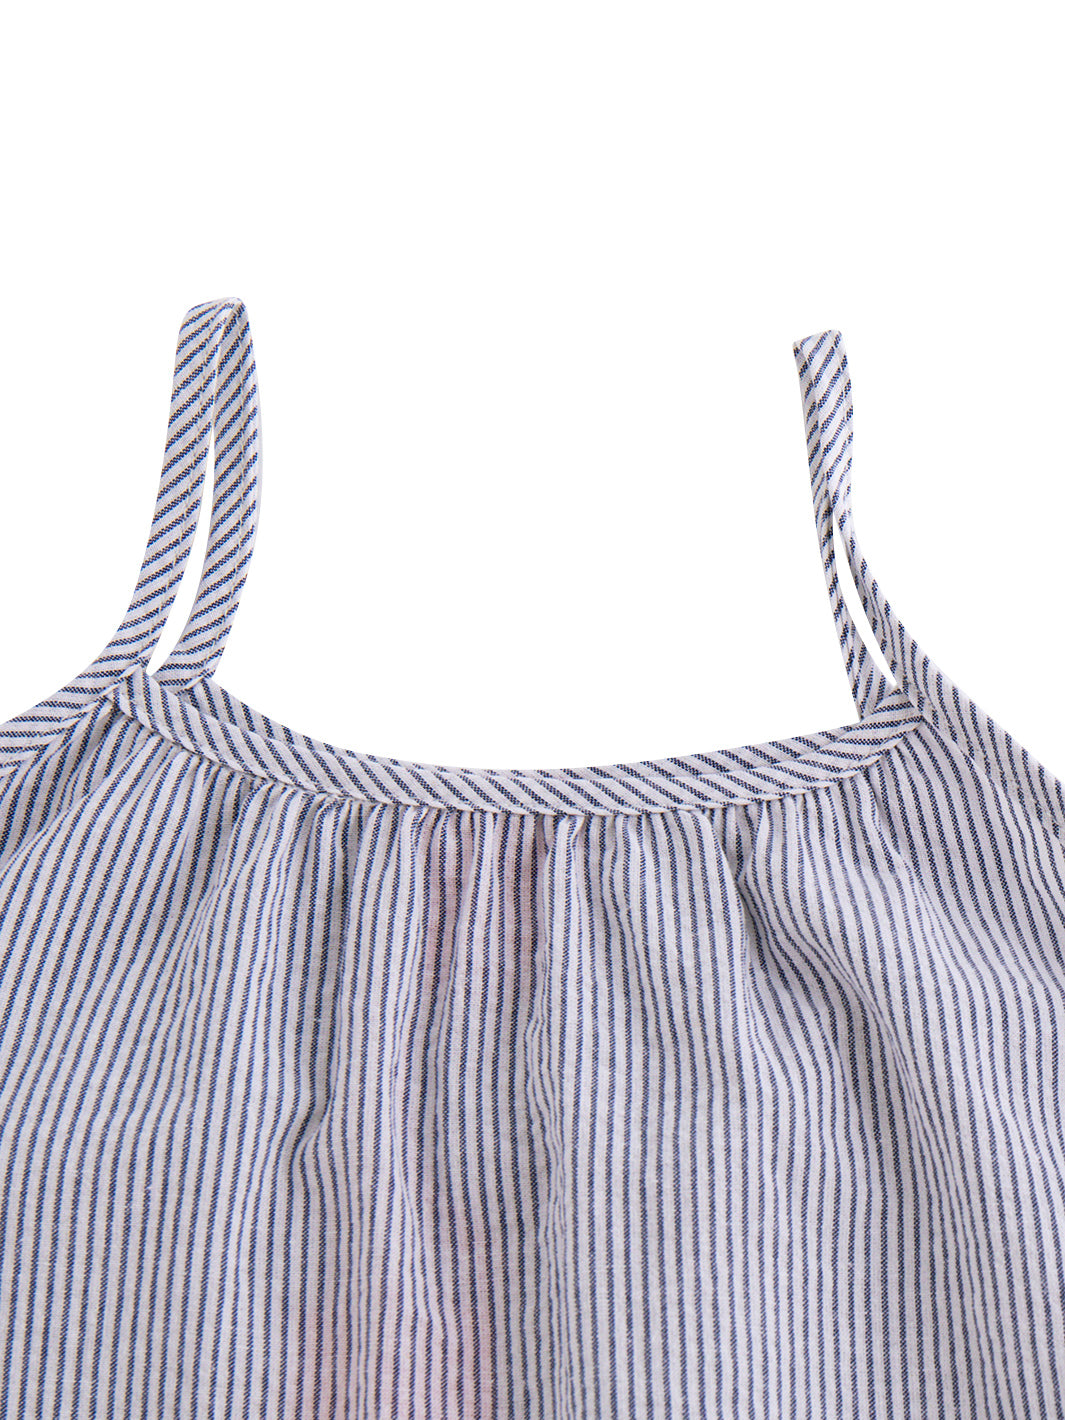 Striped Small Boat Jumper - White/Navy